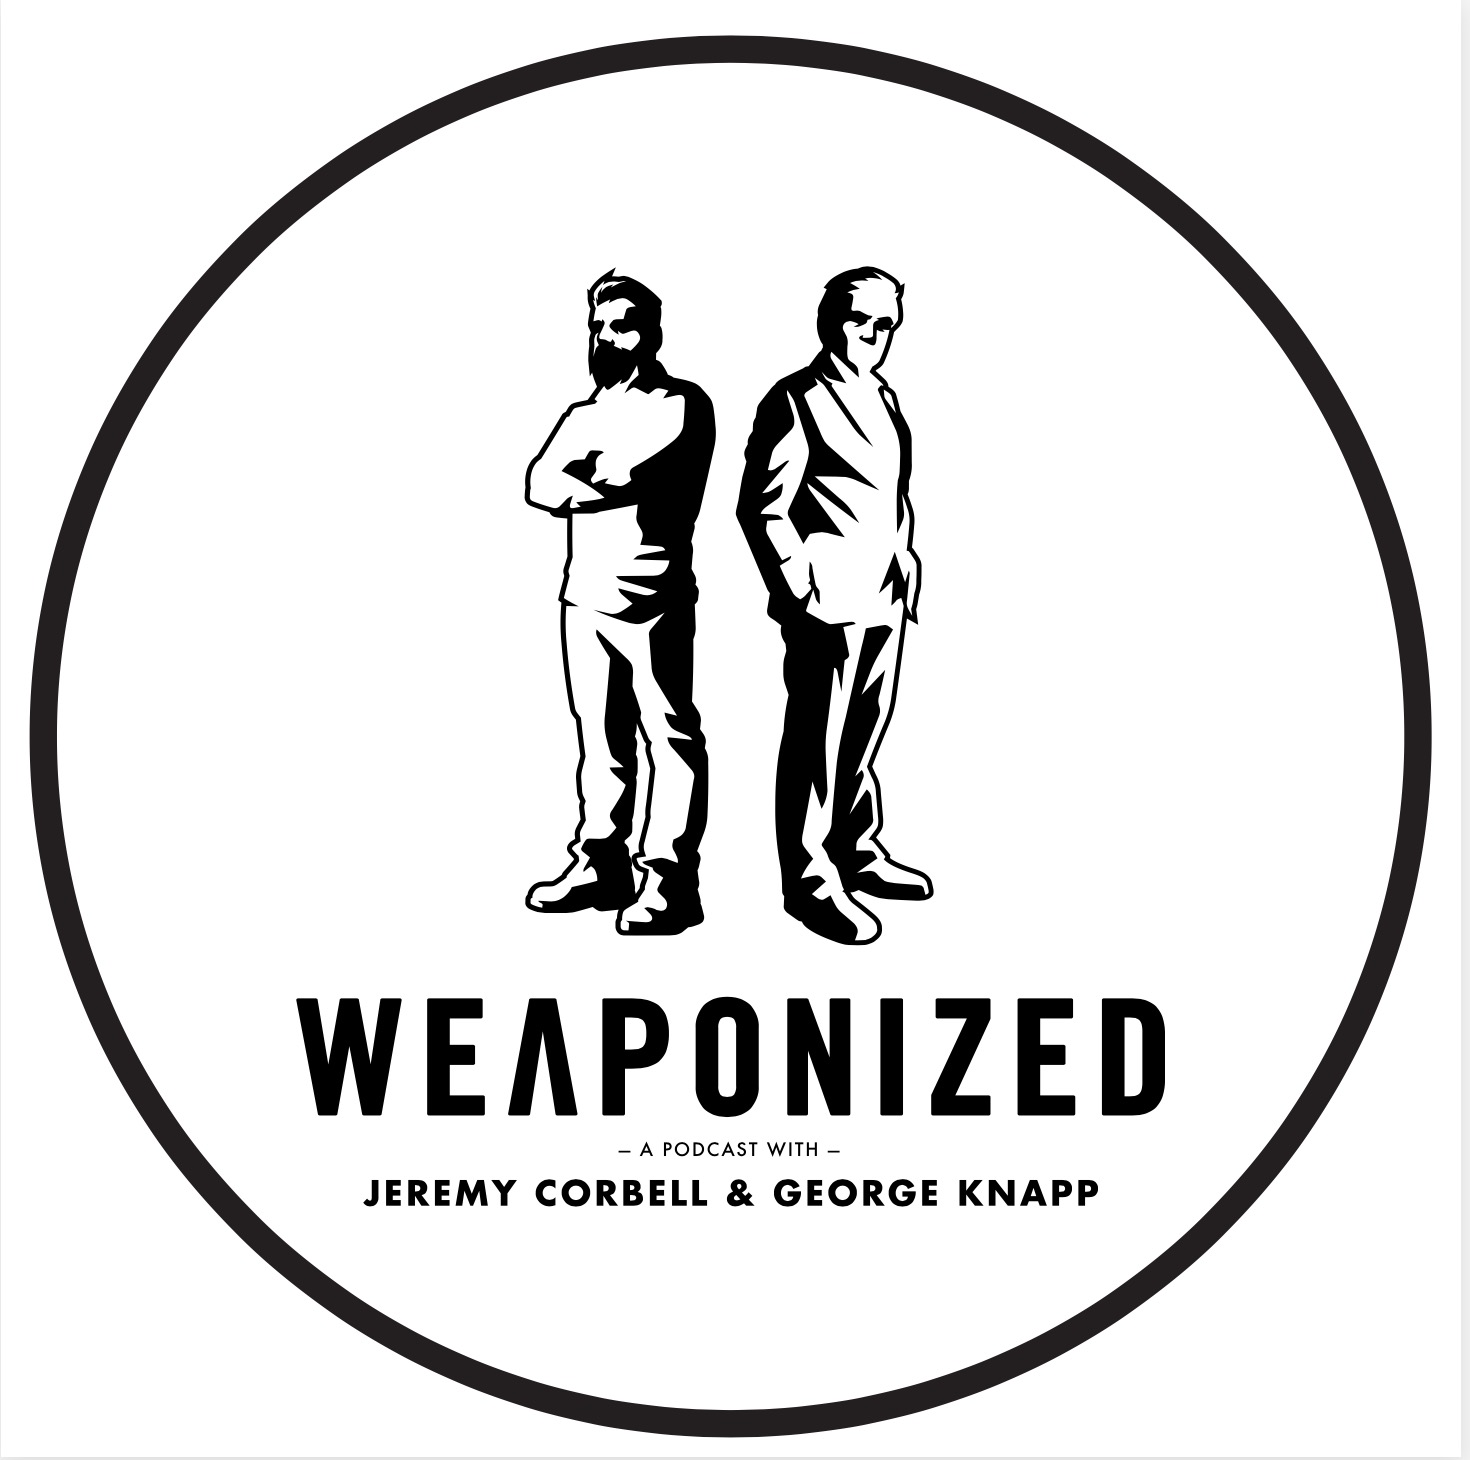 Official Weaponized Podcast Art